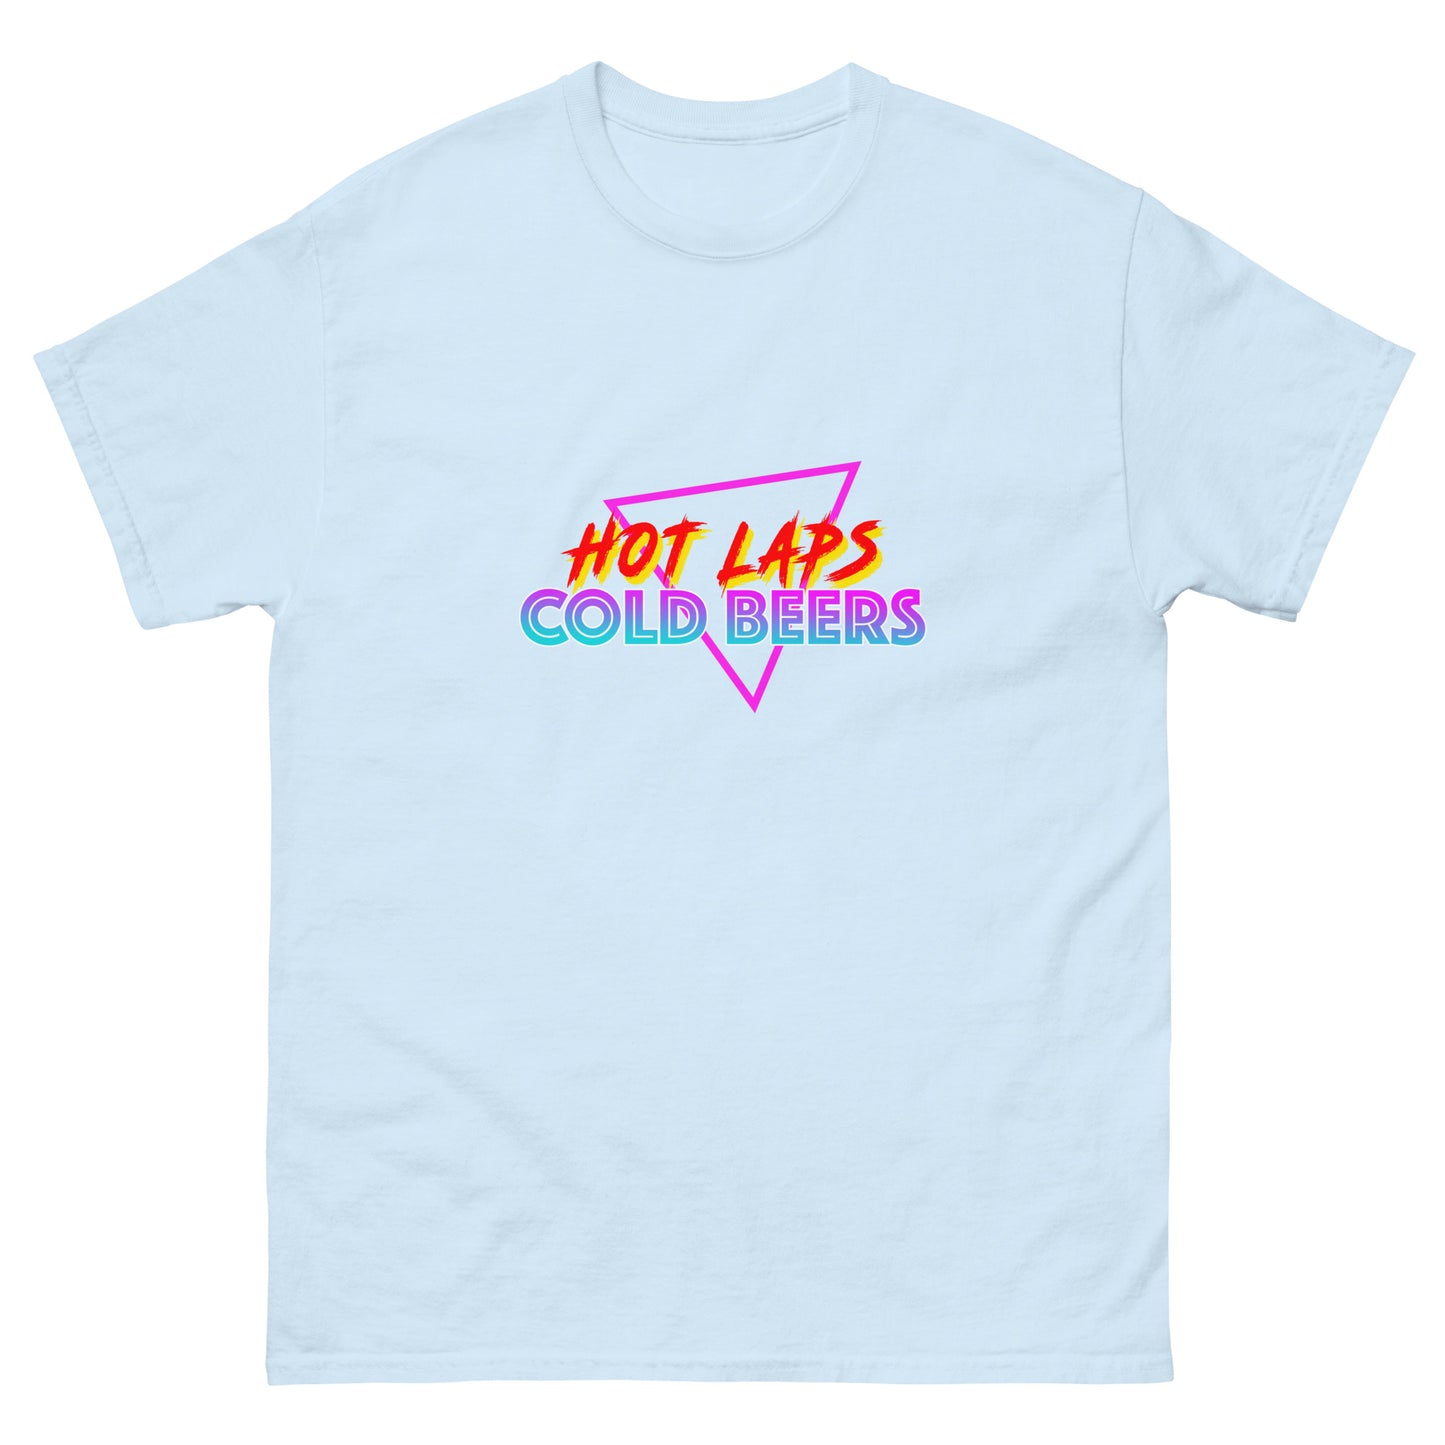 Hot Laps Cold Beers t-shirt printed by Whistler Shirts